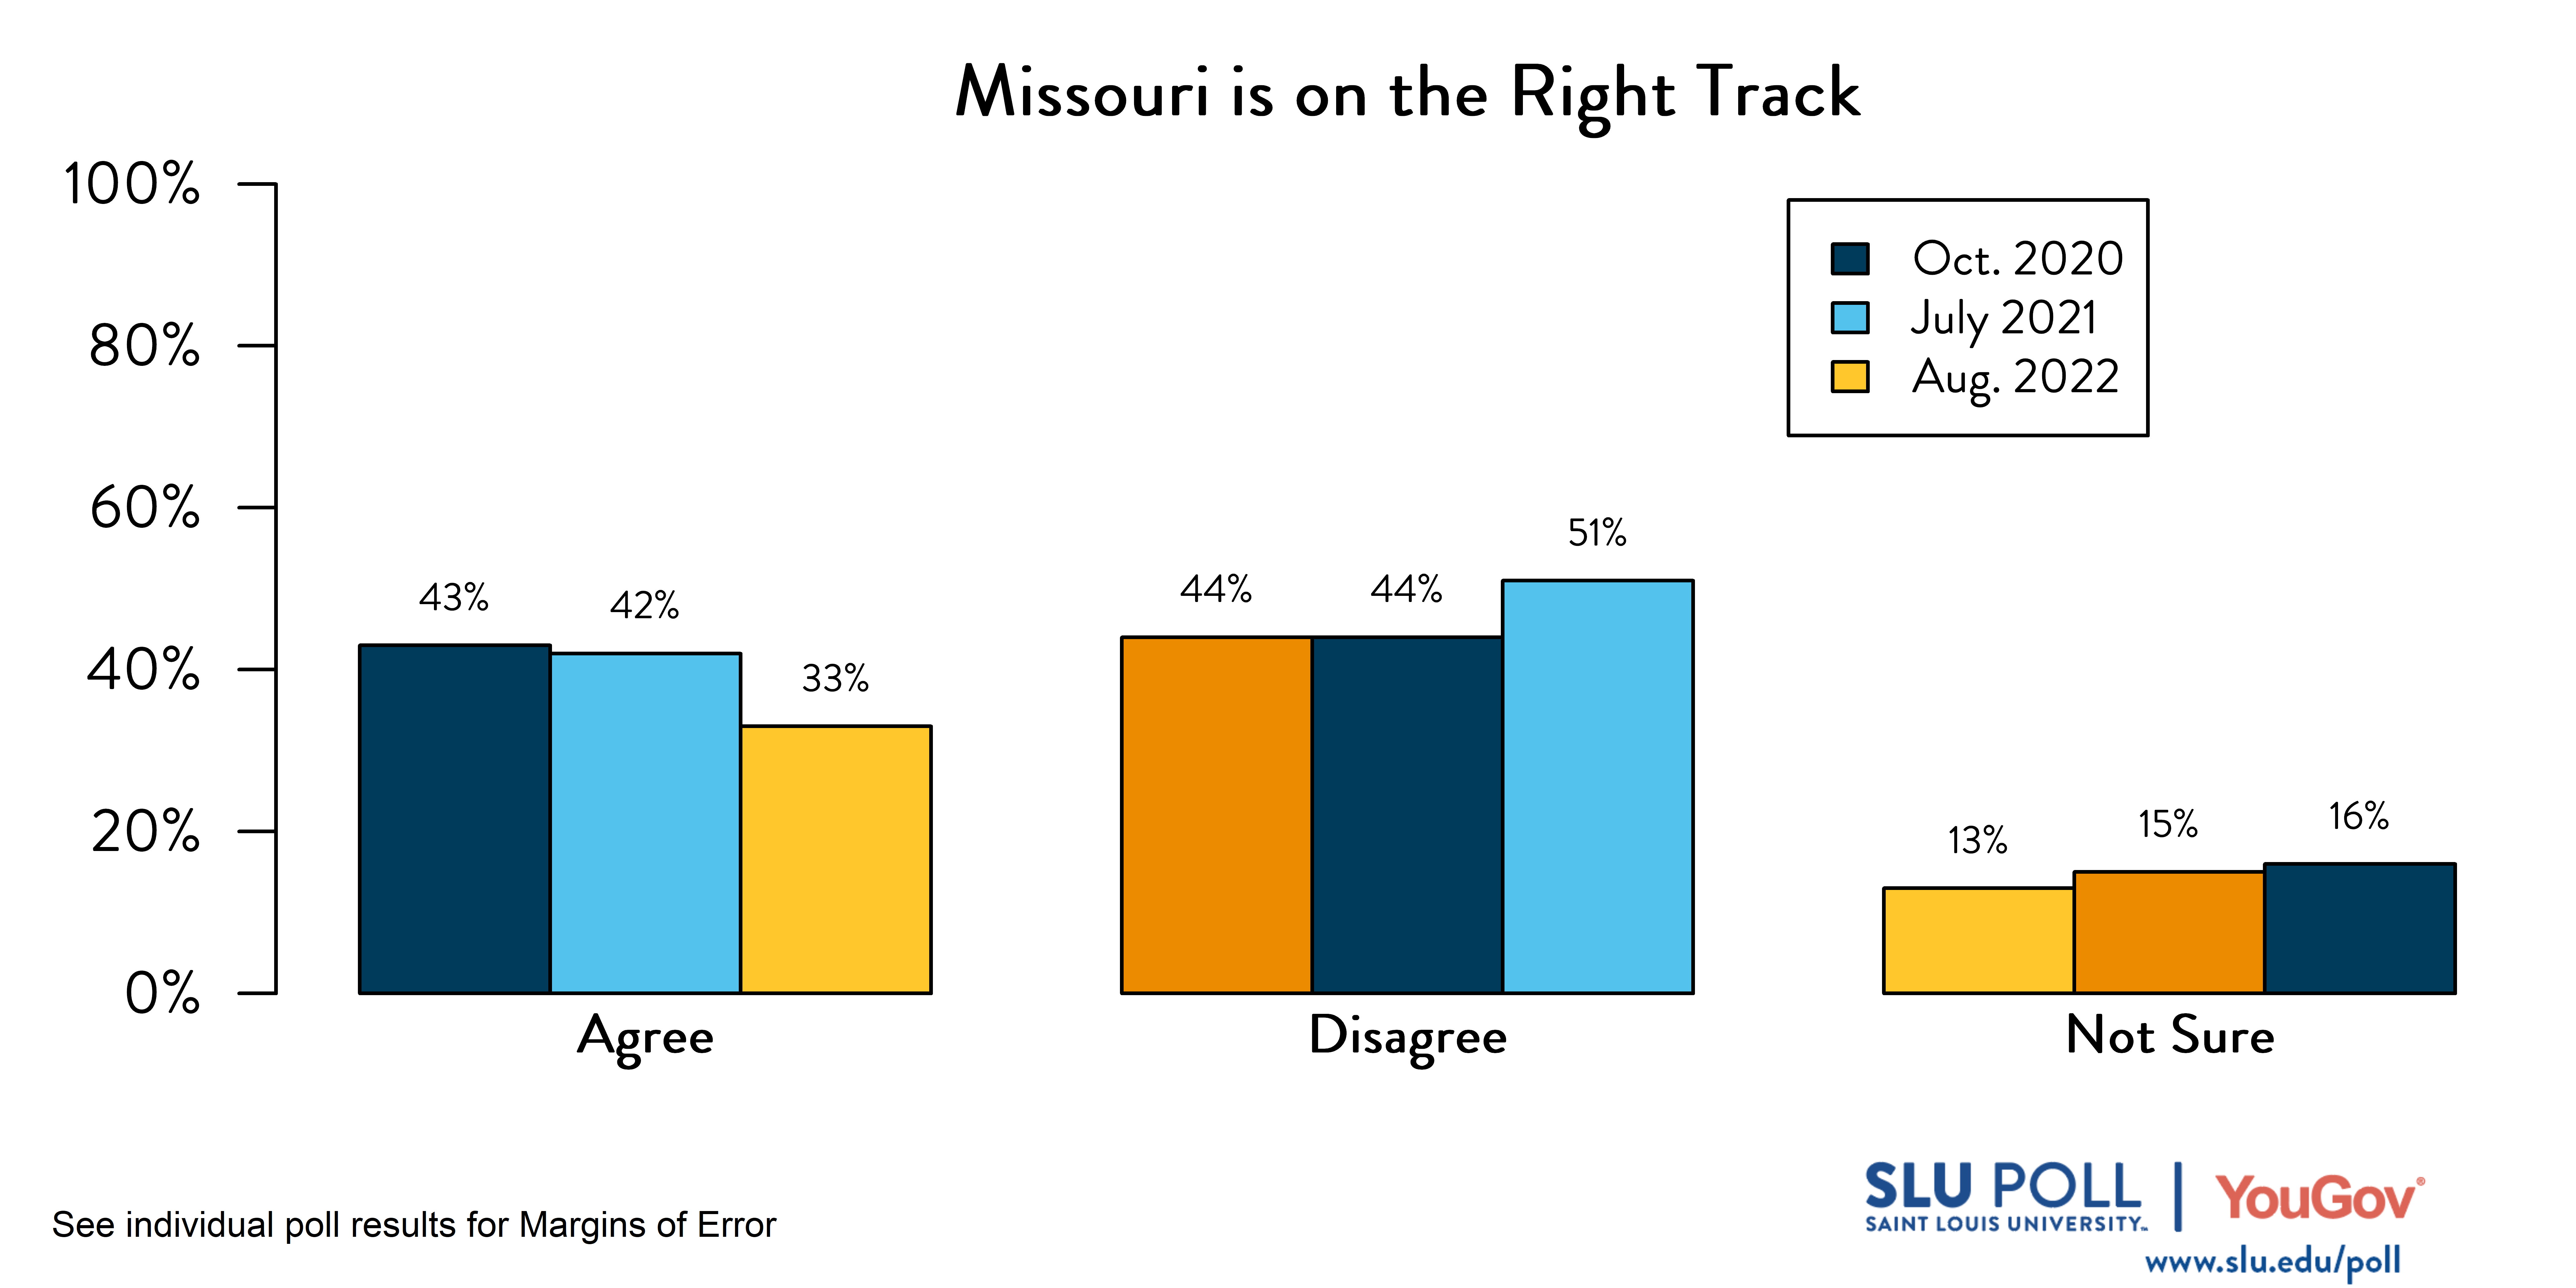 Likely voters' responses to 'Do you agree or disagree with the following statements: The State of Missouri is on the right track and headed in a good direction?': August 2022 Responses:  33% Agree, 51% Disagree, and 16% Not Sure. July 2021 Responses:  42% Agree, 44% Disagree, and 15% Not Sure. Oct. 2020 Responses:  43% Agree, 44% Disagree, and 13% Not Sure.